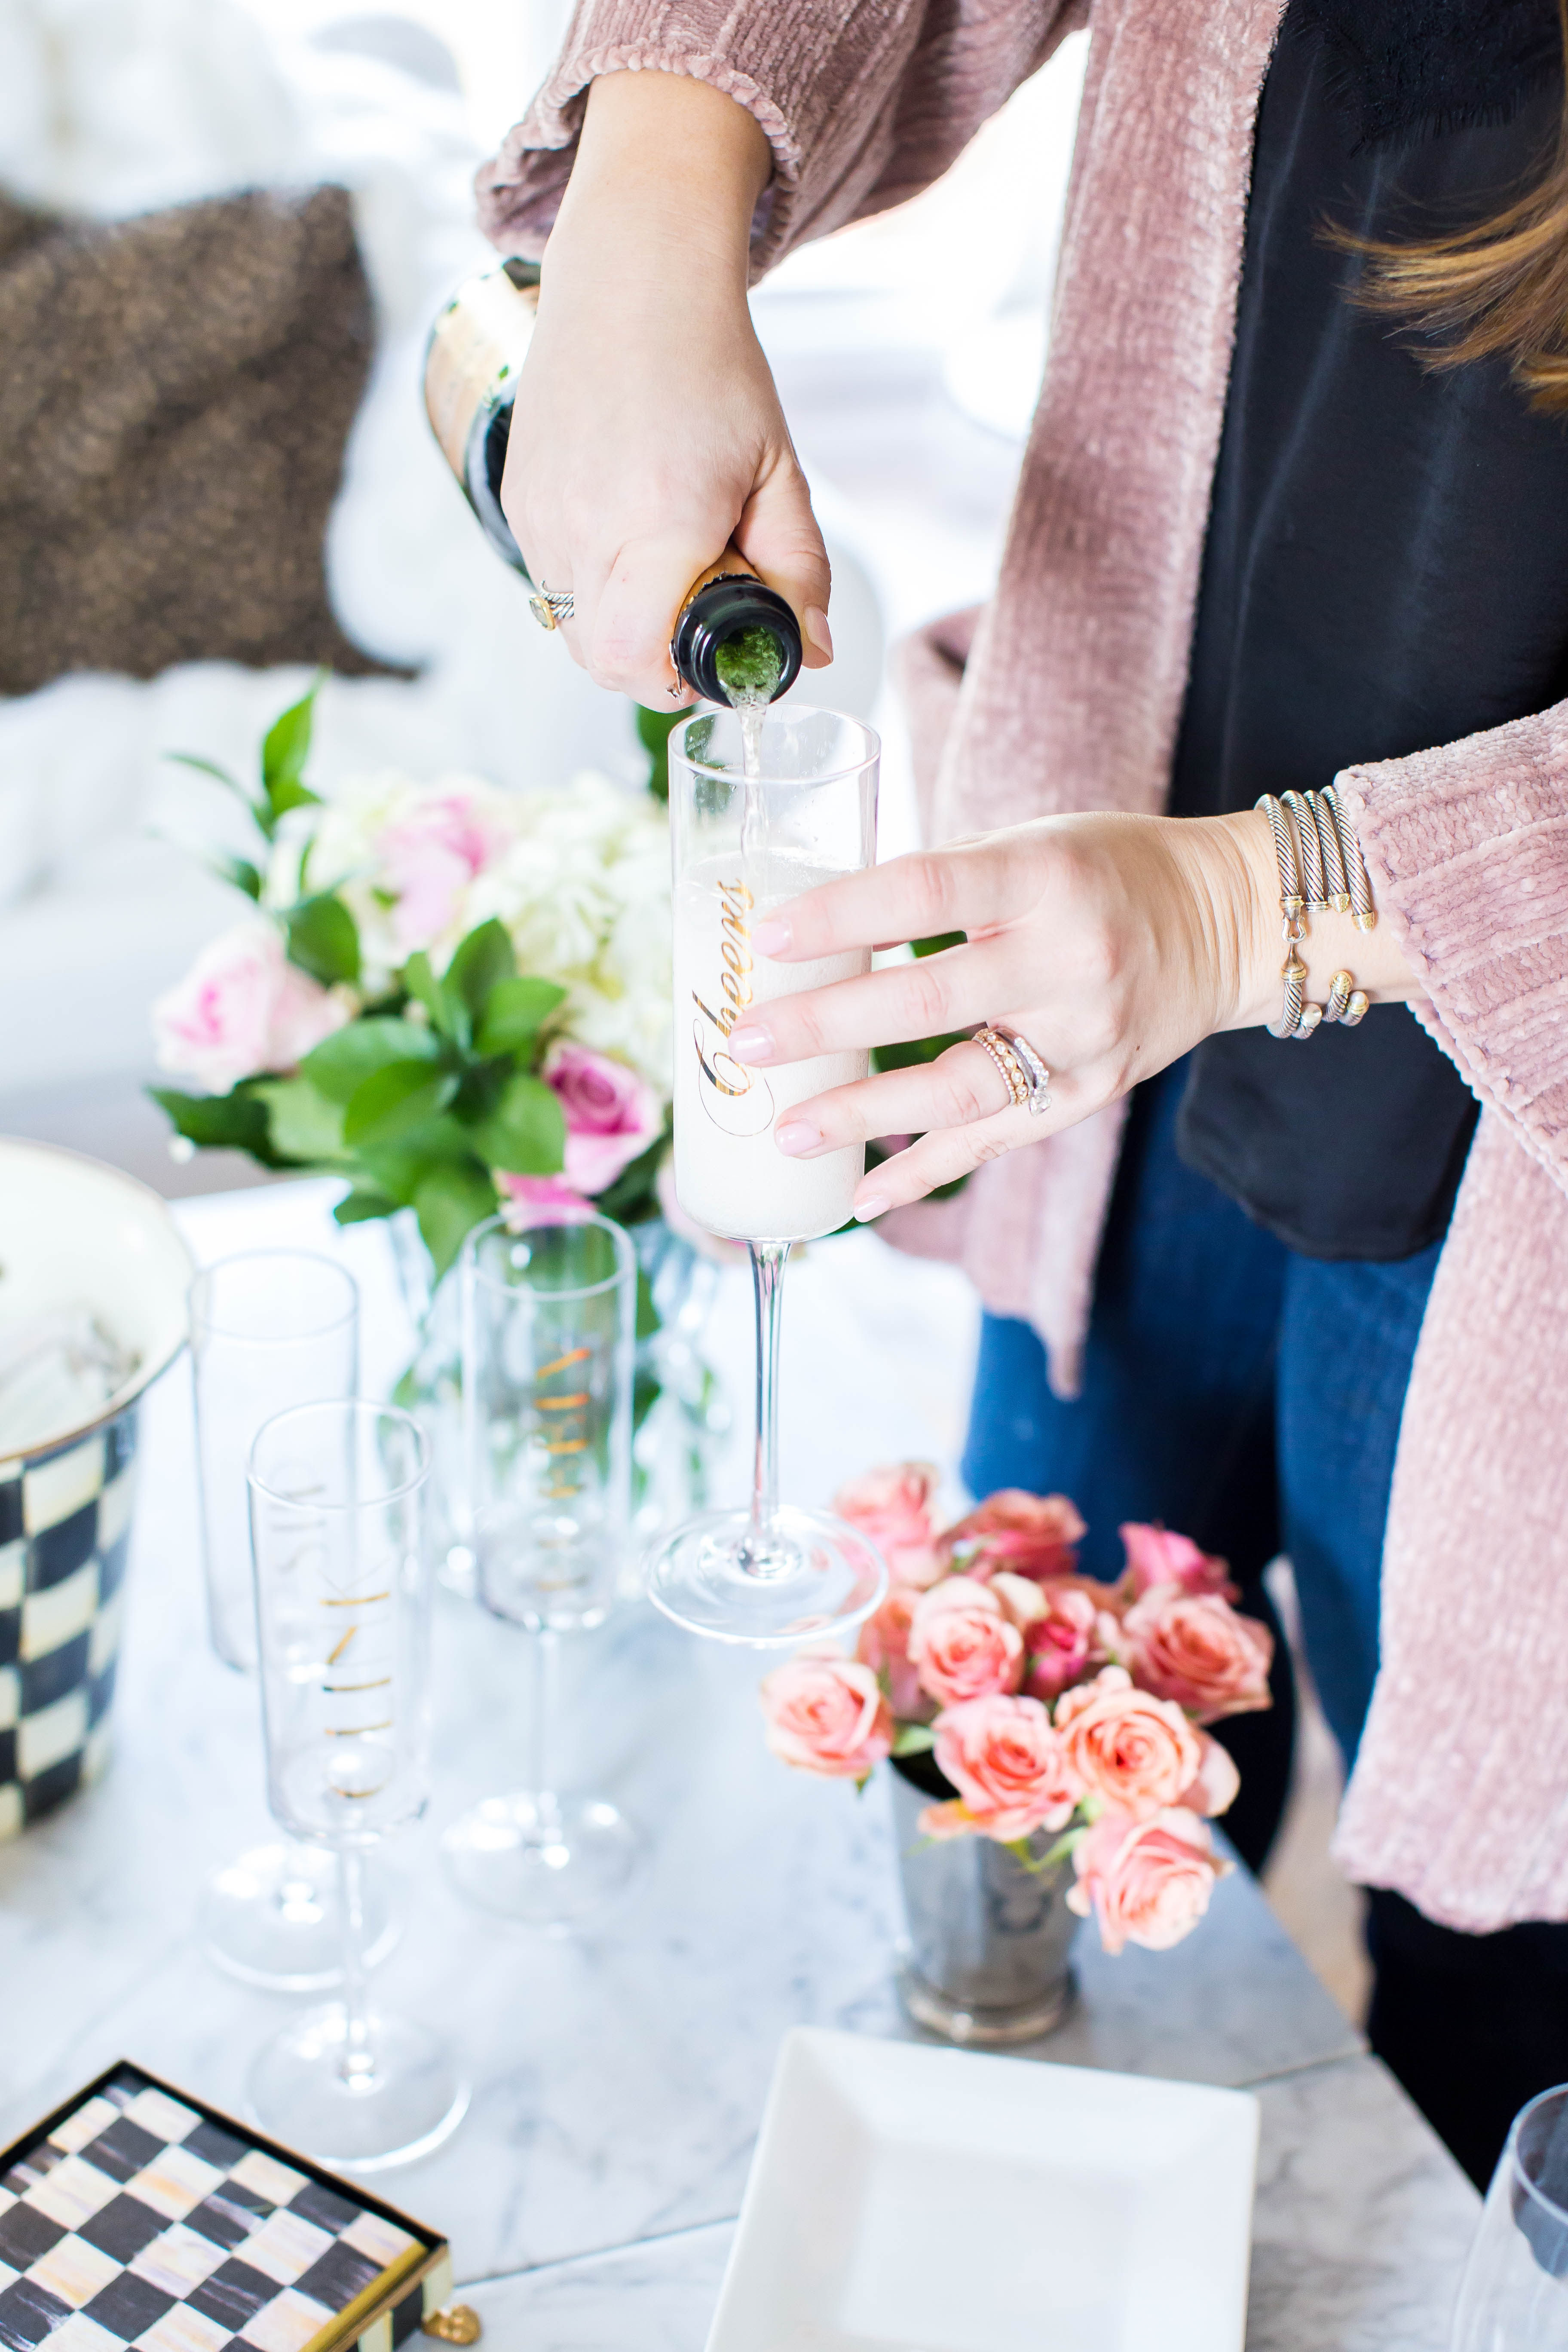 How to Host the Ultimate Girls Night In by popular North Carolina lifestyle blogger Coffee Beans and Bobby Pins